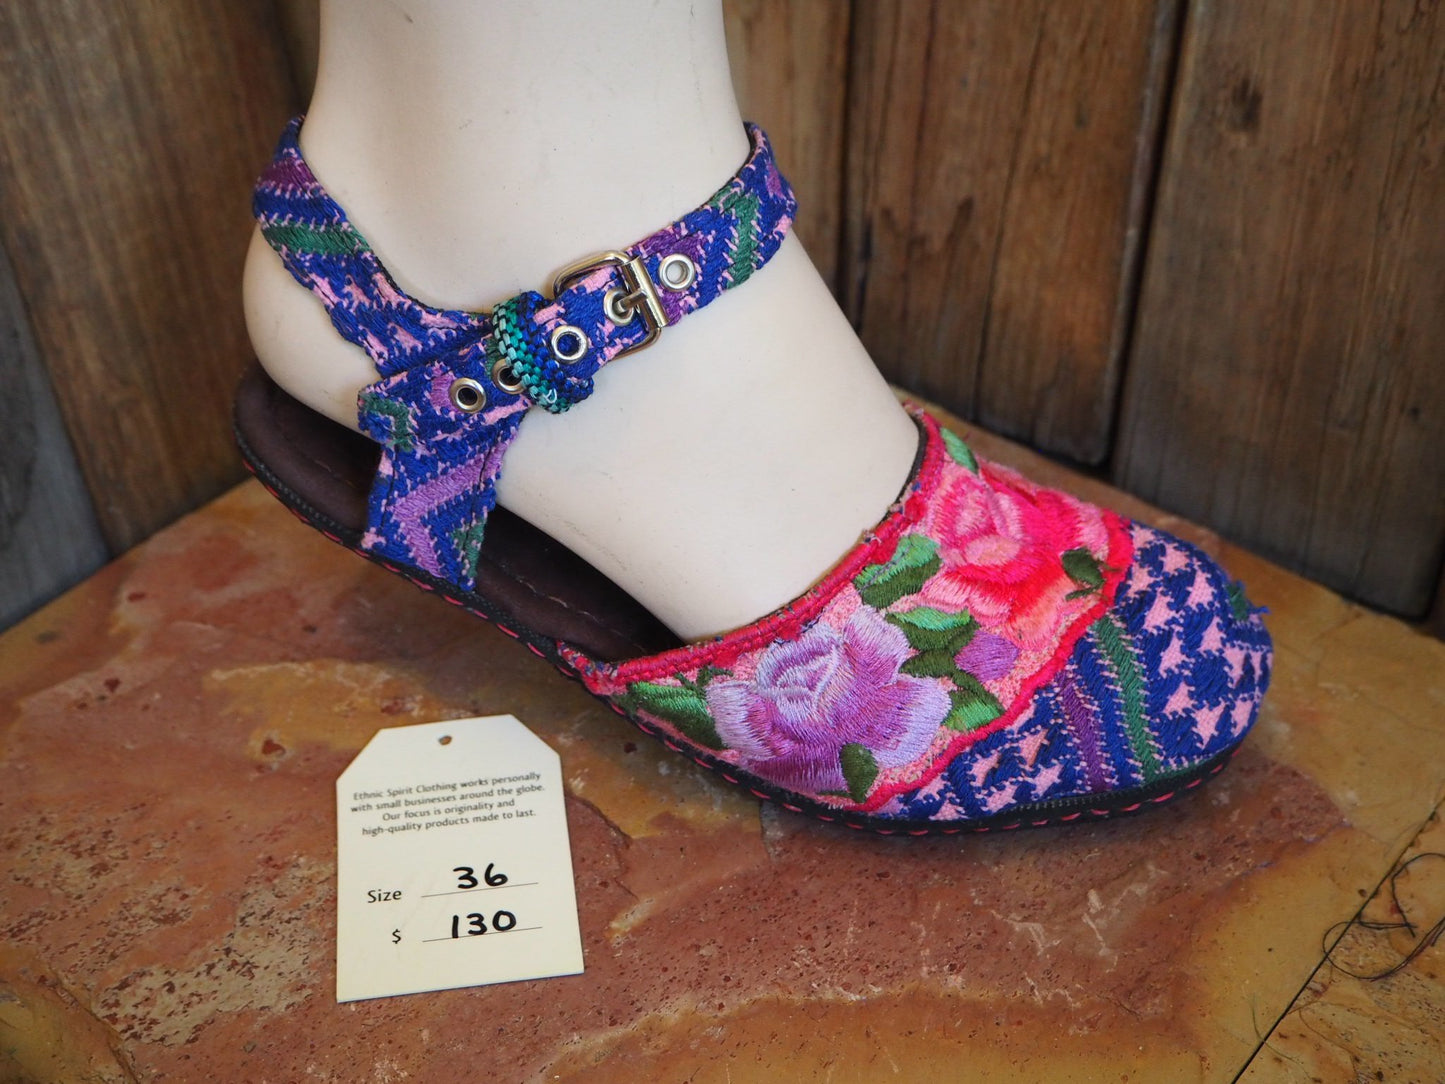 Size 36 Ballerina Sandals - Pink and Purple Rose and Blue Pattern